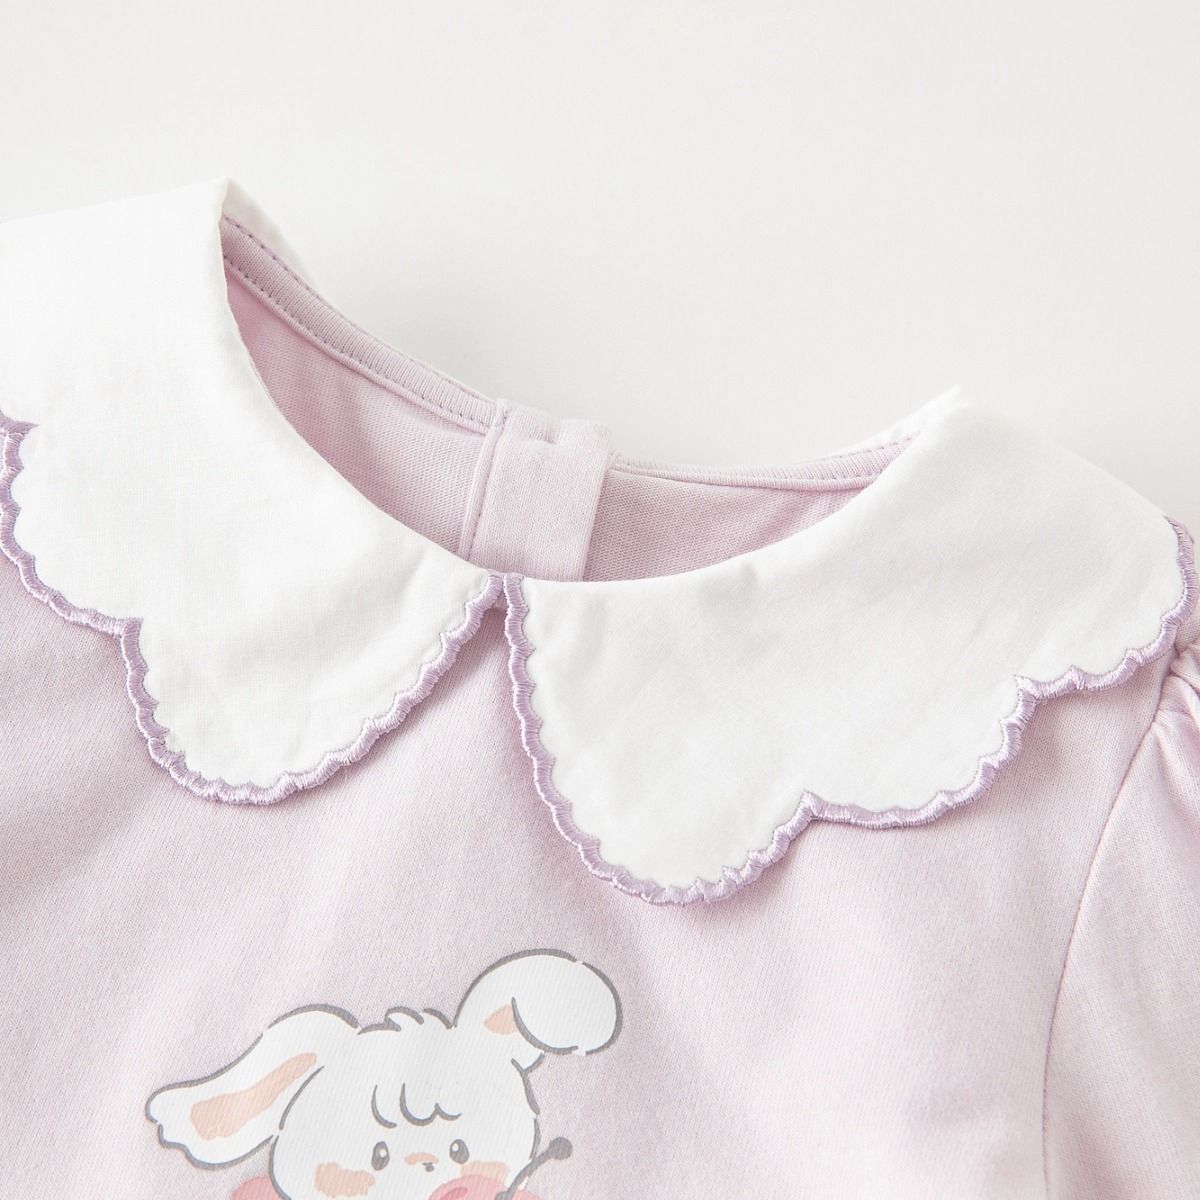 Girls' long-sleeved t-shirt spring and autumn new style Korean version of cute cartoon tops for small and medium-sized children, fashionable cotton bottoming shirts